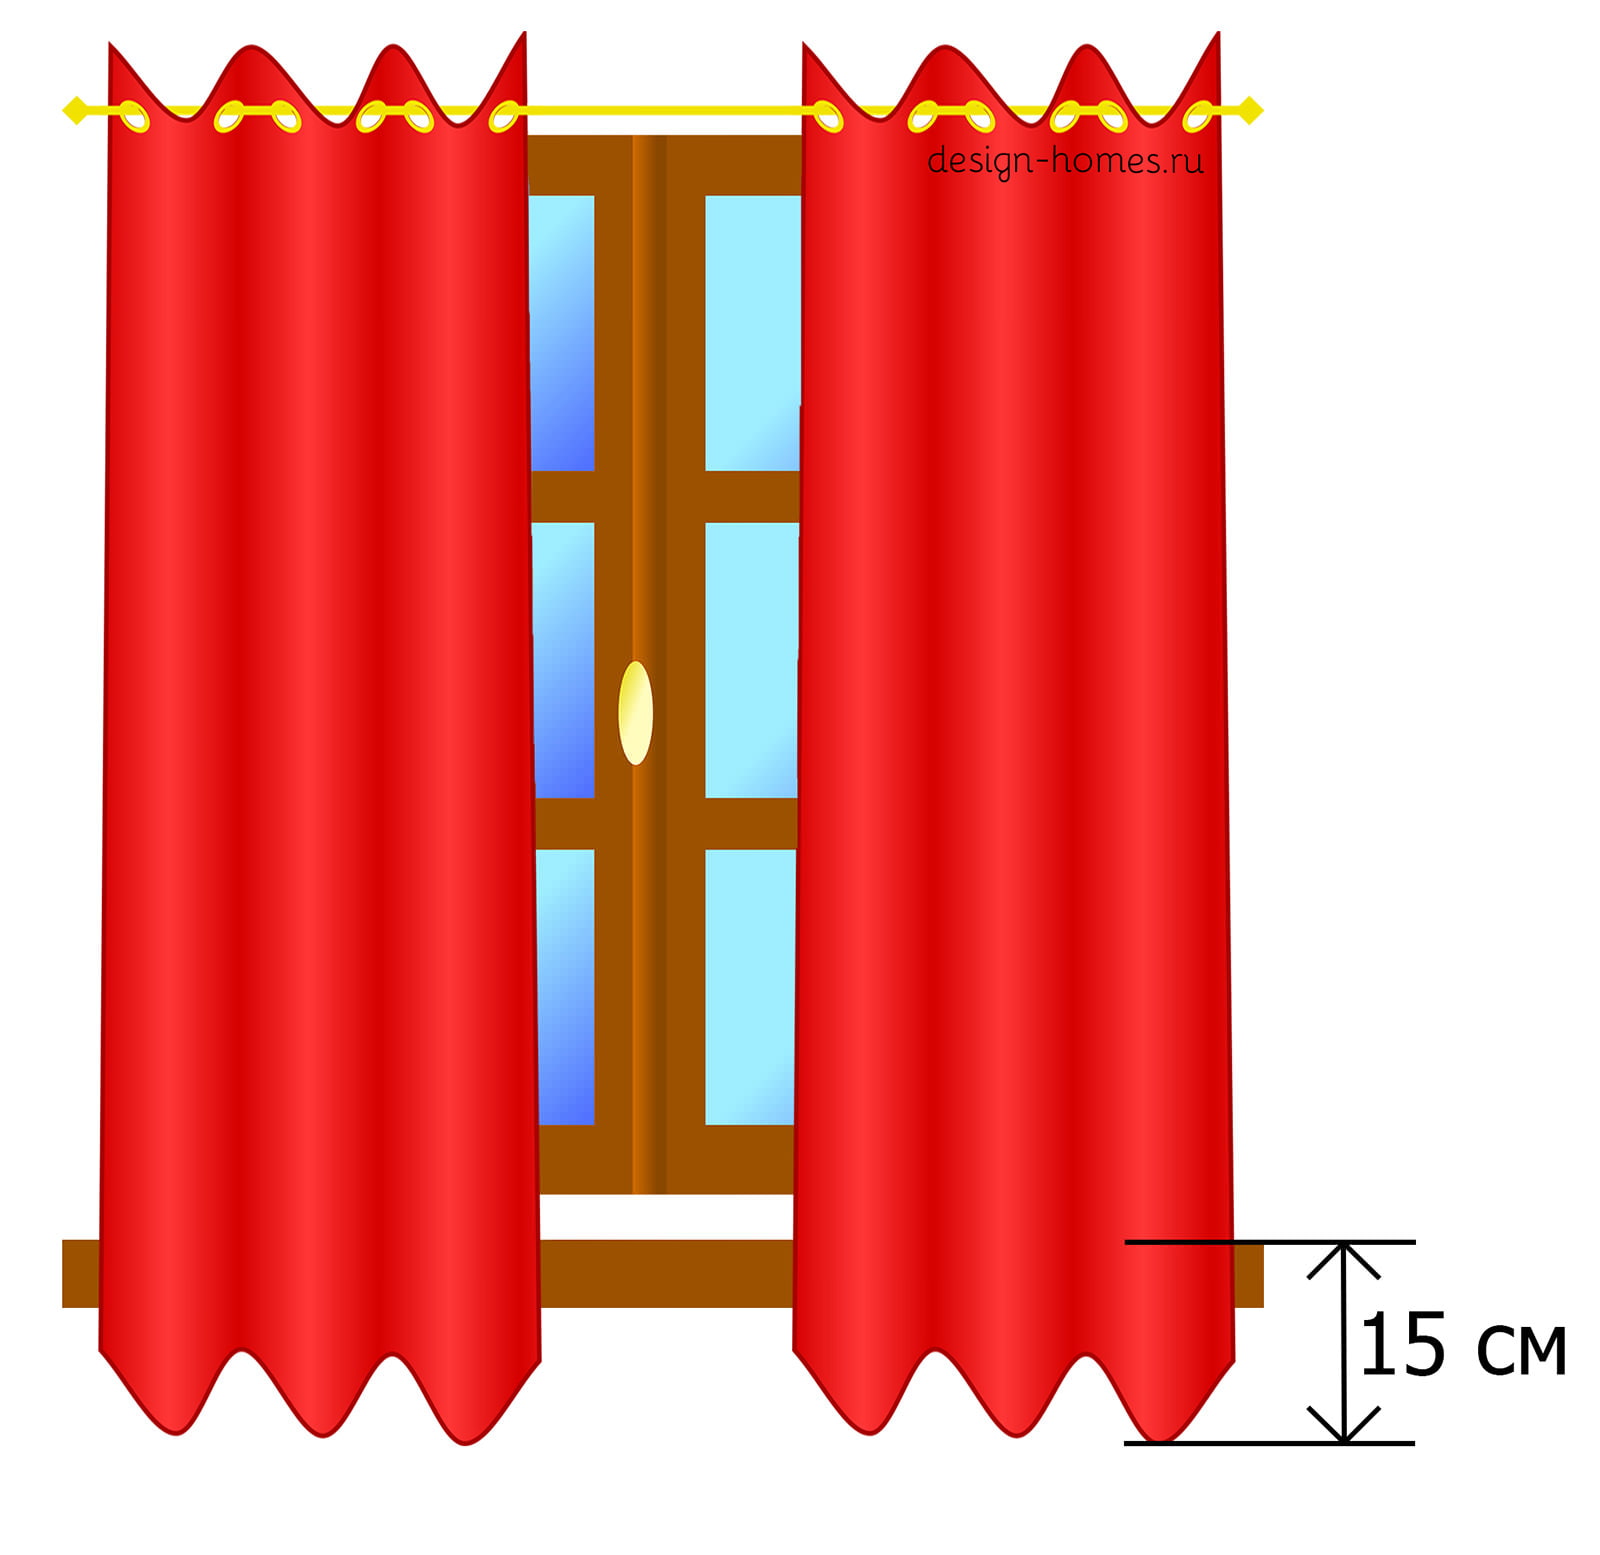 fabric consumption for curtains